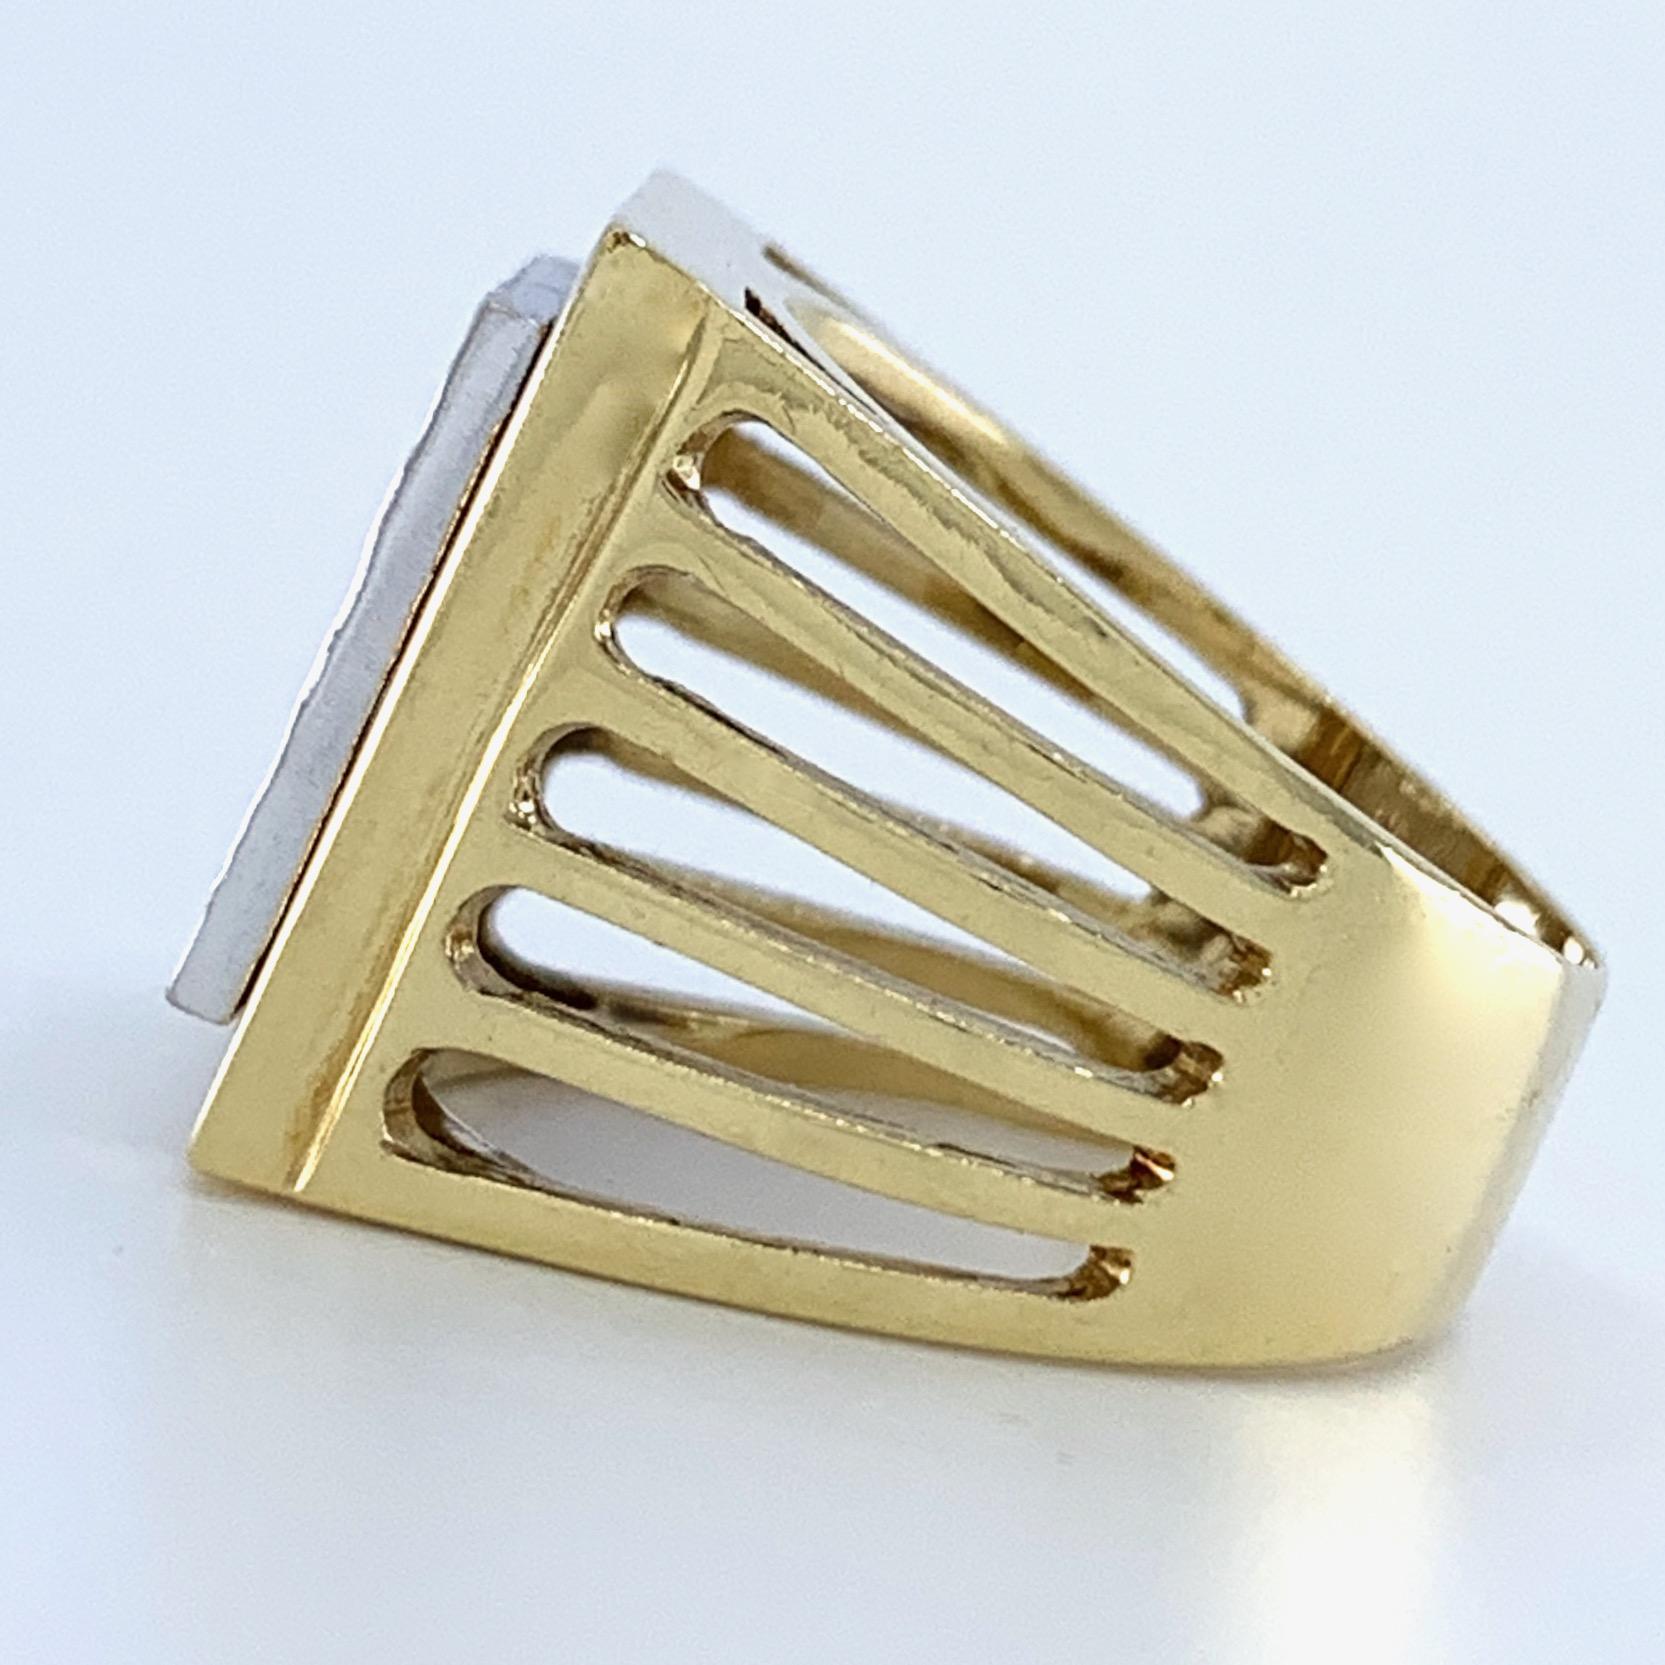 Modern Hammered Square Signet Ring in 18 Karat White and Yellow Gold, circa 1980